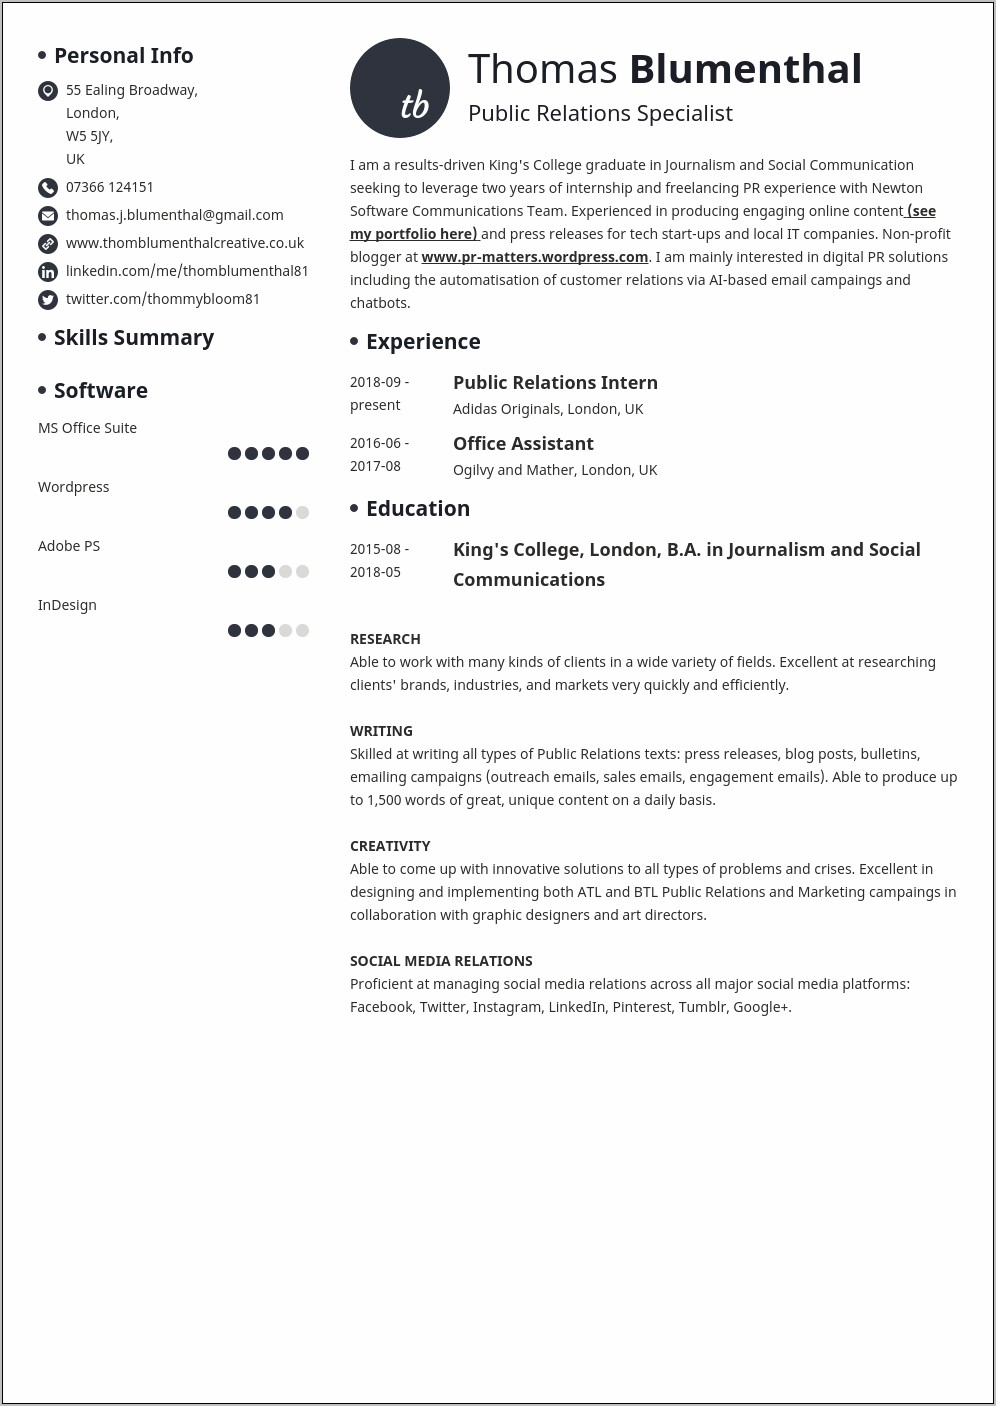 Skill Based Resume For College Students